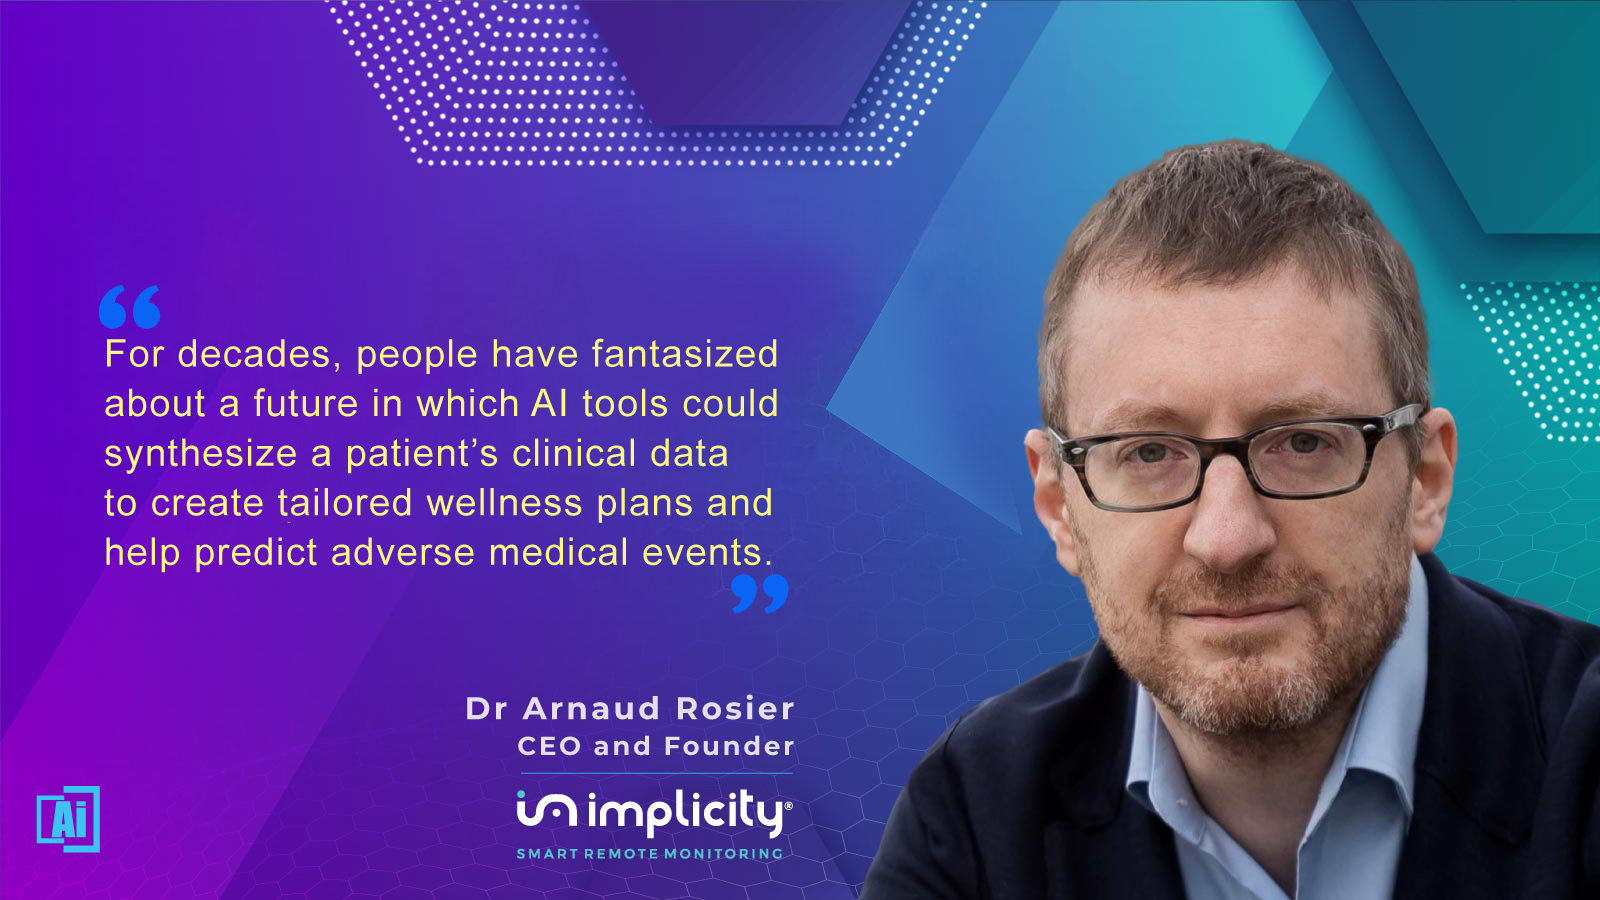 Dr. Arnaud Rosier, CEO & Founder at Implicity